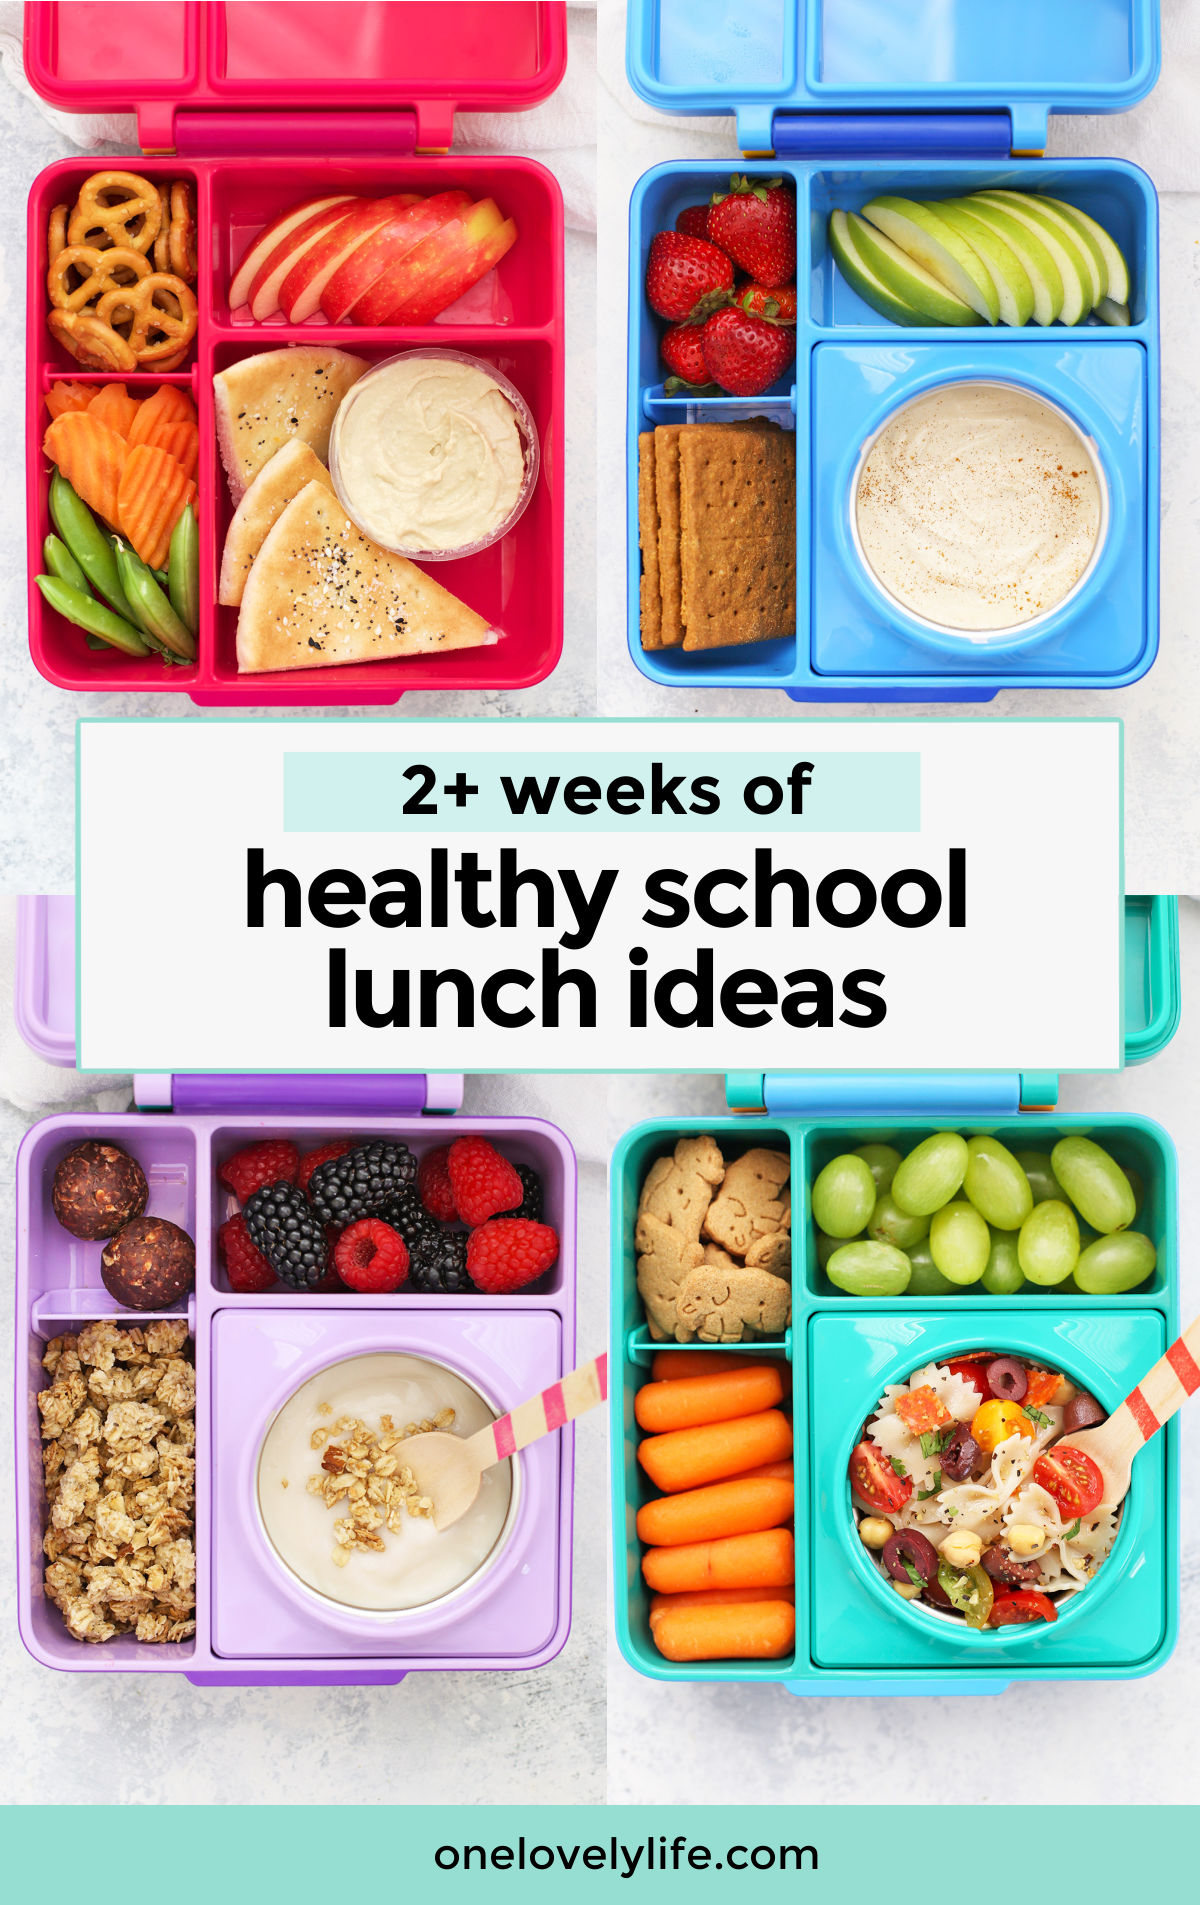 https://www.onelovelylife.com/wp-content/uploads/2021/07/2-Weeks-of-Healthy-School-Lunches-Pin1C.jpg